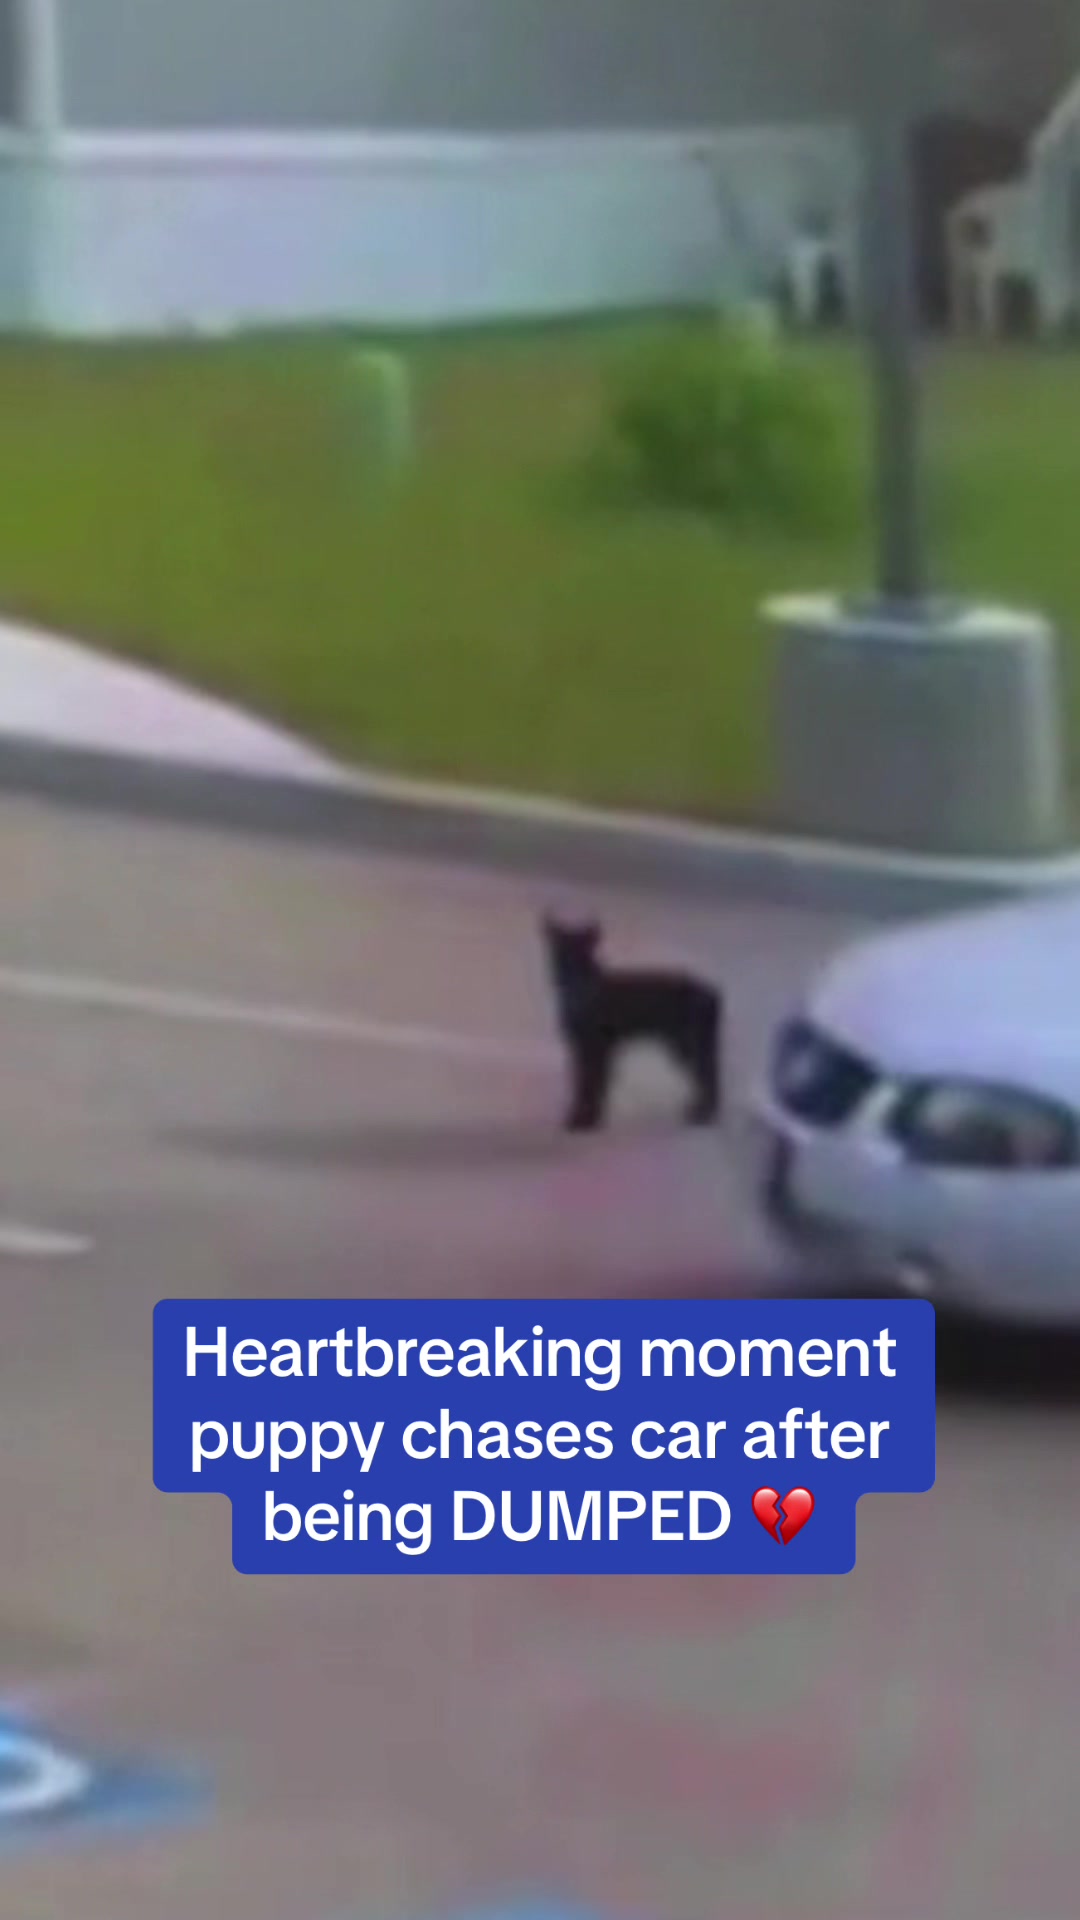 Surveillance footage captured the heartbreaking moment a three-month-old German Shepard was abandoned in a California parking lot. The confused pup chased after the car before it sped away. Fortunately, the puppy was safely captured and is now up for adoption at Fresno Animal Center.  🎥 Nexstar  #puppy #animals #sad #adoptabledogs #germanshepherd #california